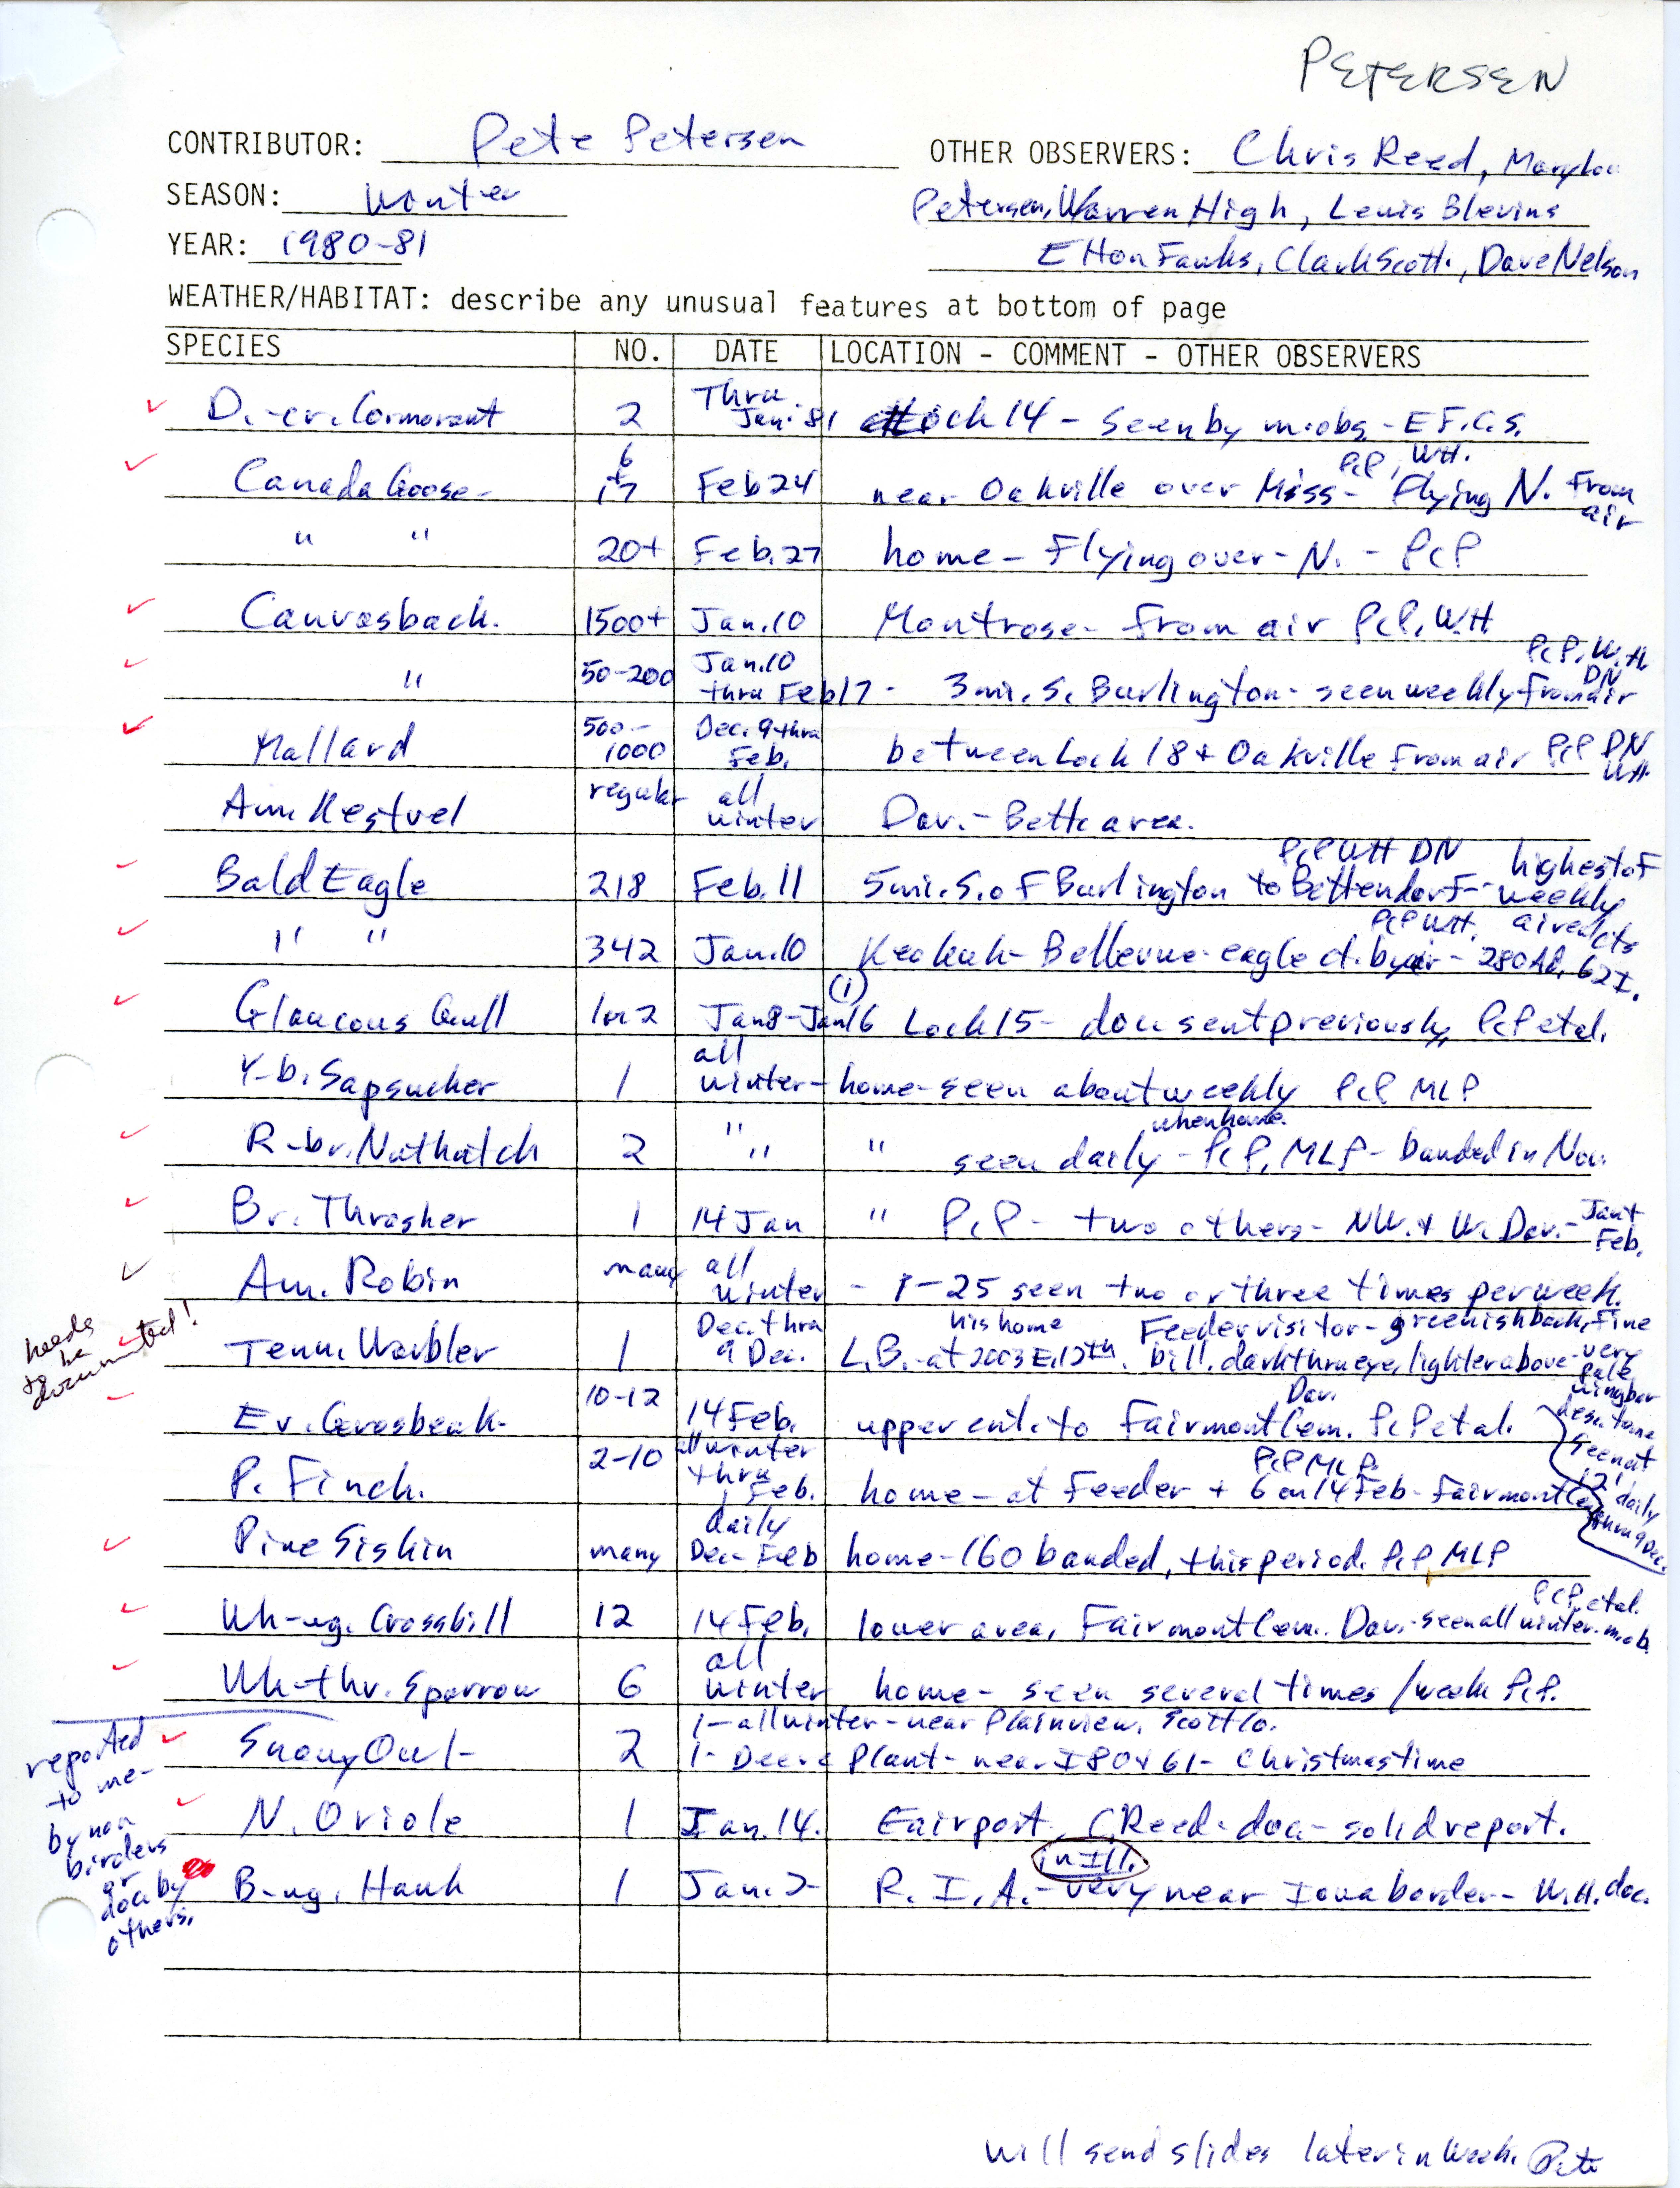 Annotated bird sighting list for Winter 1980-1981 compiled by Pete Petersen